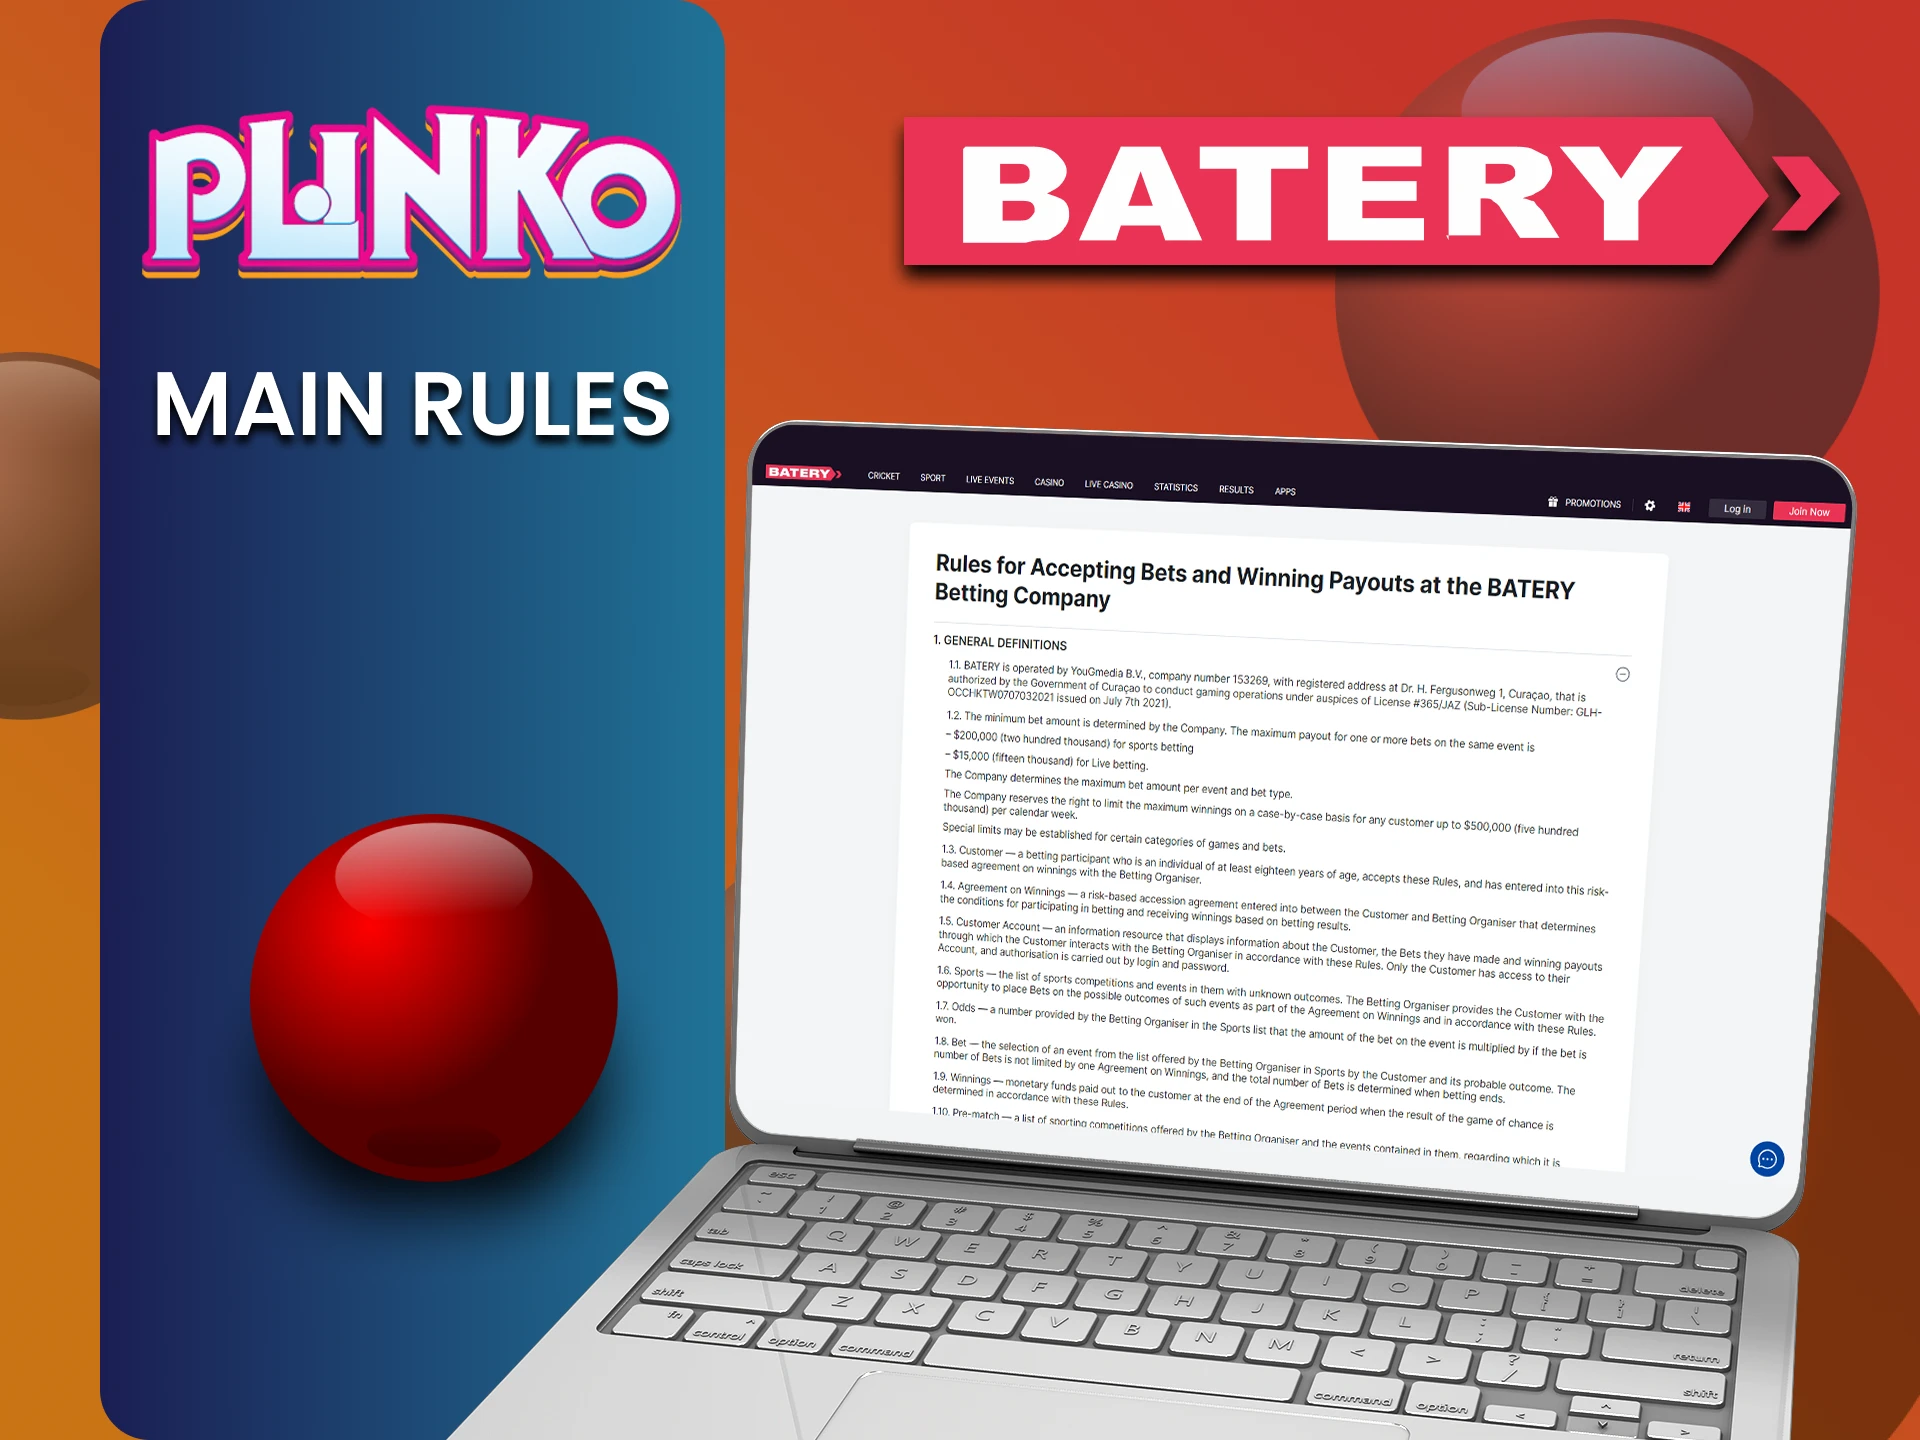 The Batery website has rules that you should study before playing Plinko.